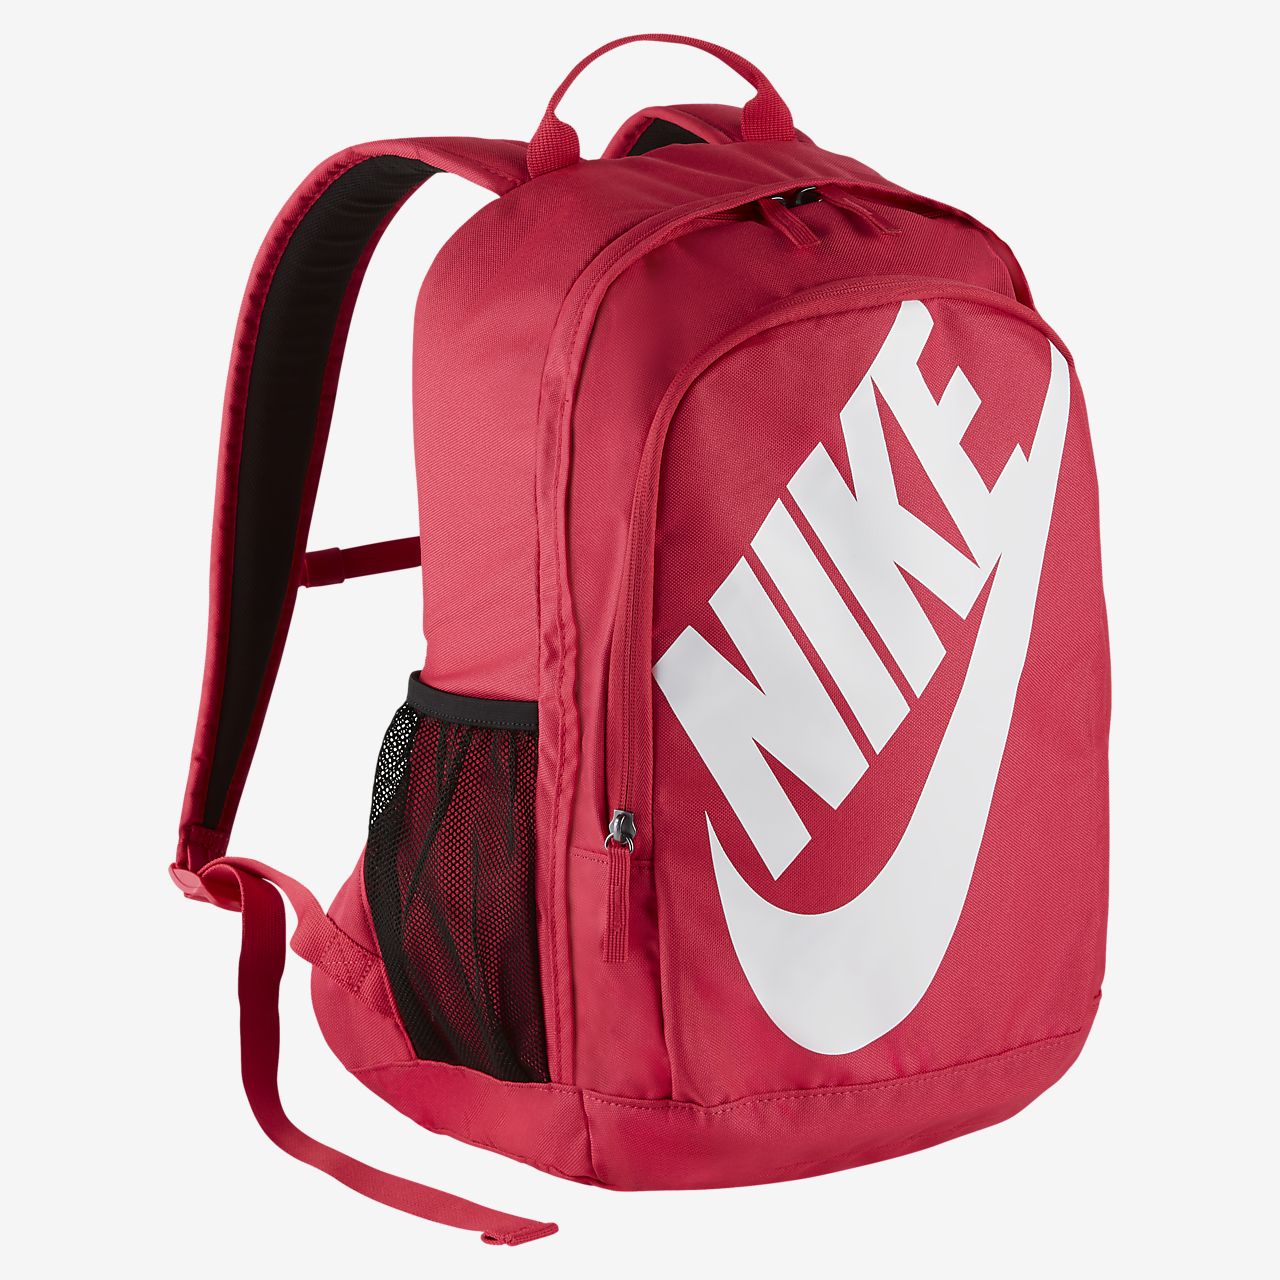 Hayward Futura Backpack Nike On Sale 60 Off Empow Her Com